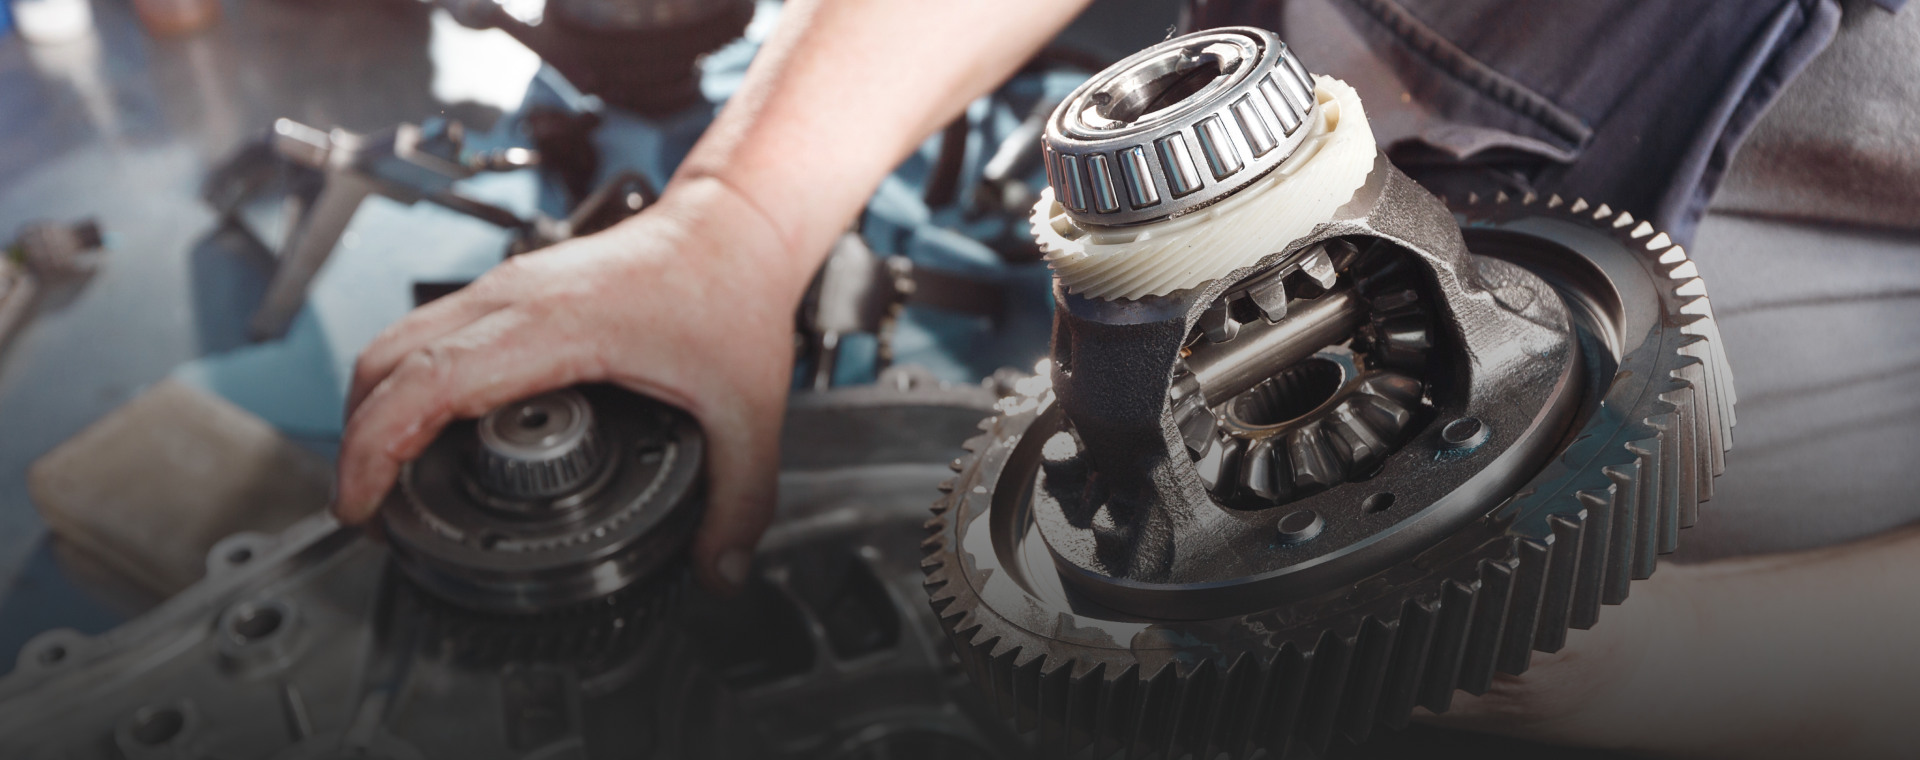 Transmission and Auto Repair Specialist | G-Force Transmission & Auto LLC